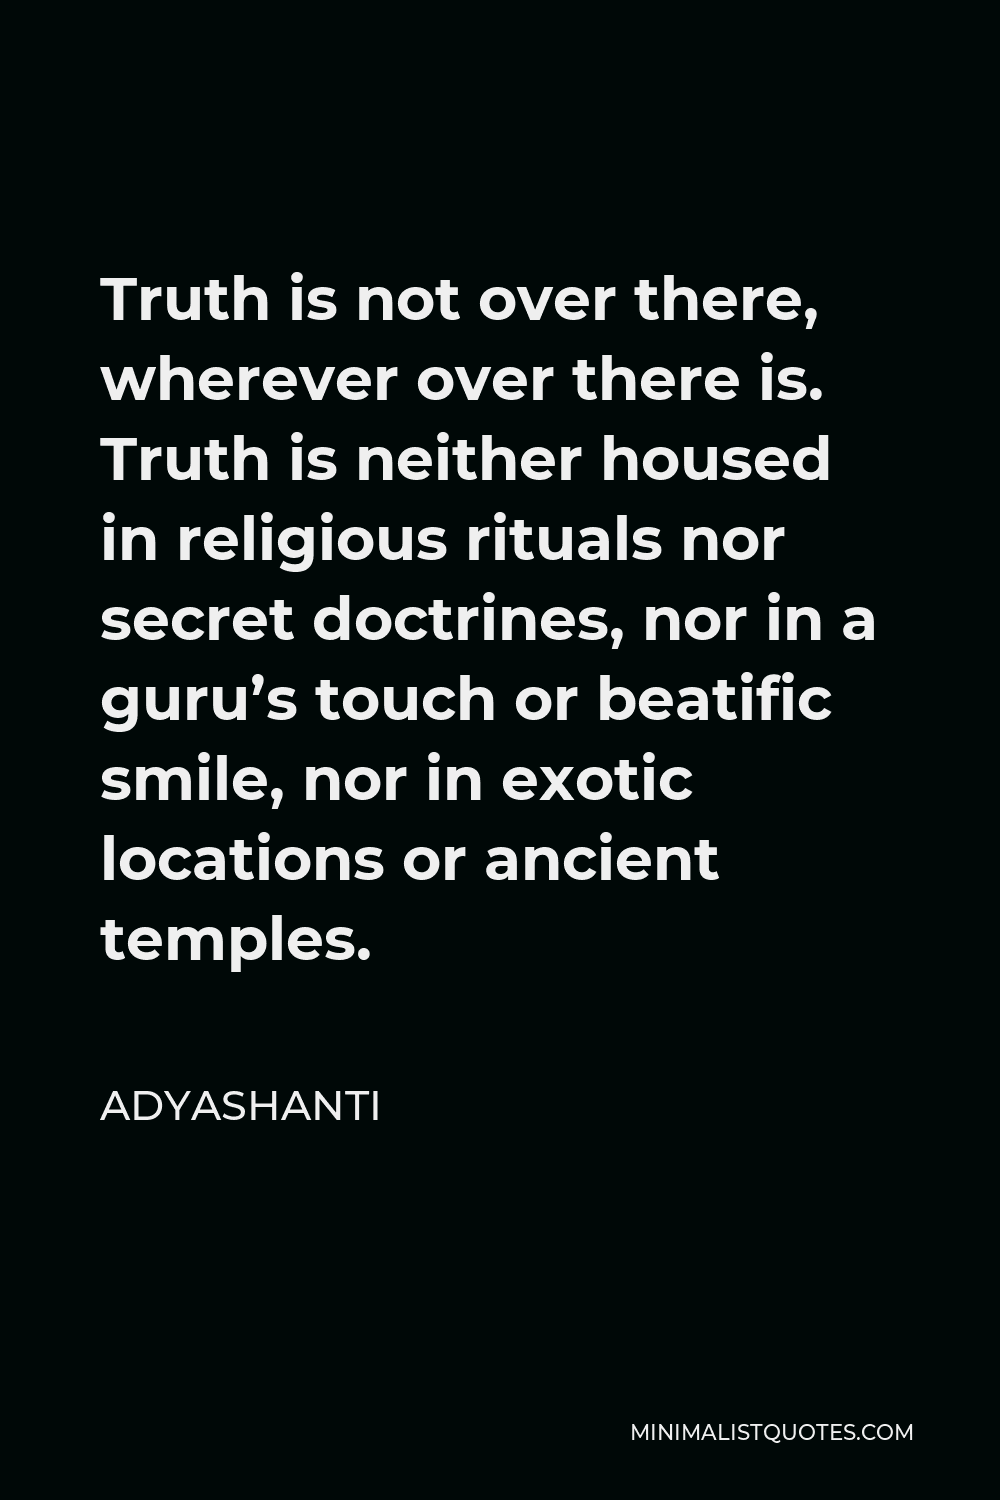 Adyashanti Quote - Truth is not over there, wherever over there is. Truth is neither housed in religious rituals nor secret doctrines, nor in a guru’s touch or beatific smile, nor in exotic locations or ancient temples.